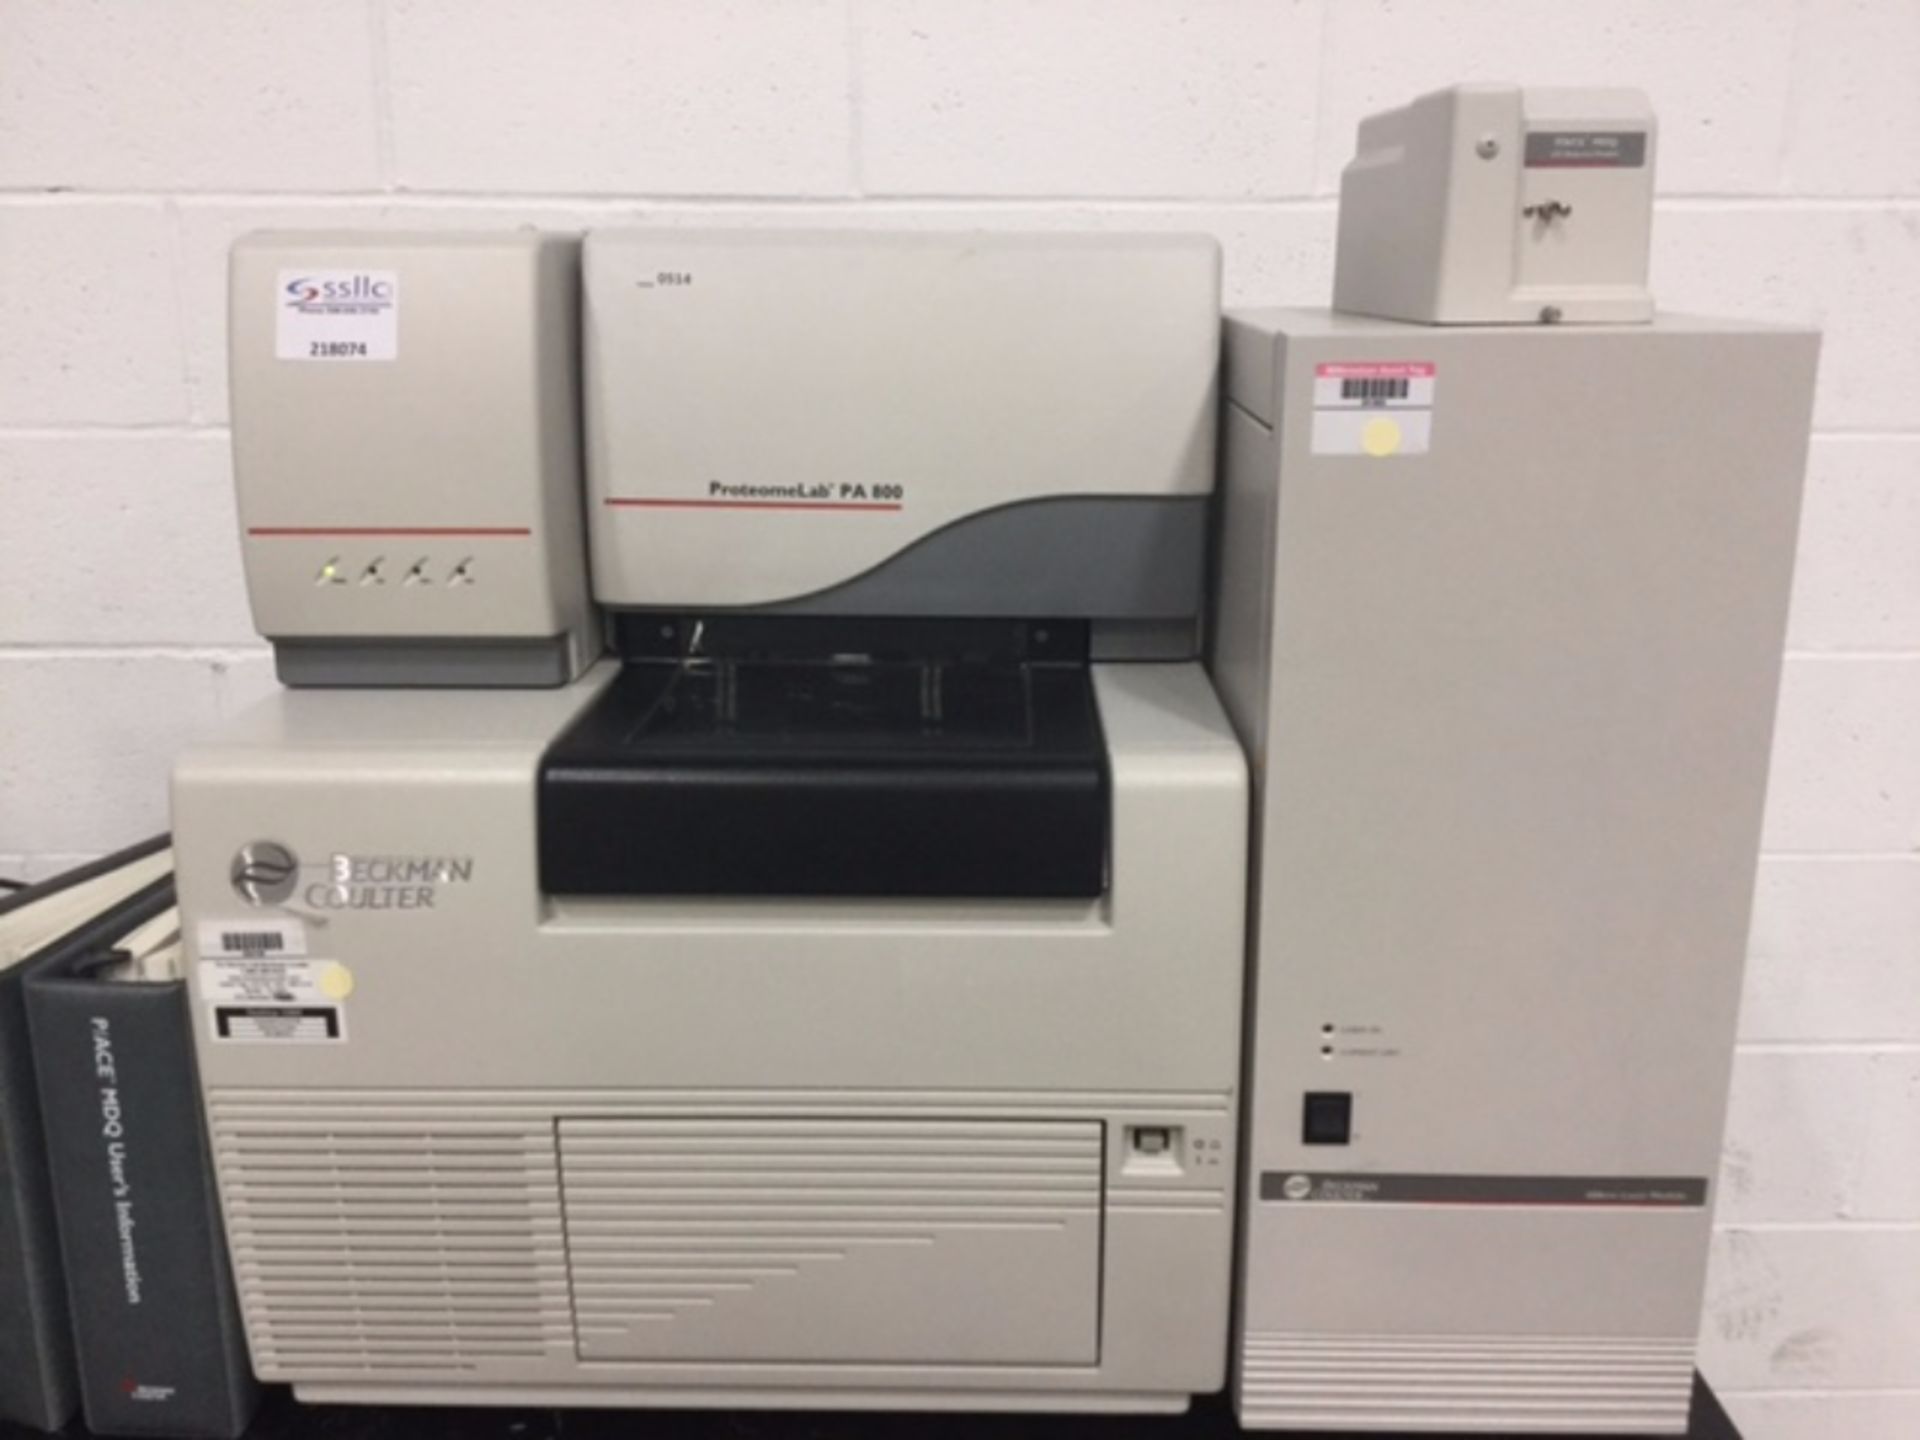 Beckman Coulter ProteomeLab PA 800 Protein Characteriztion System - Image 2 of 10